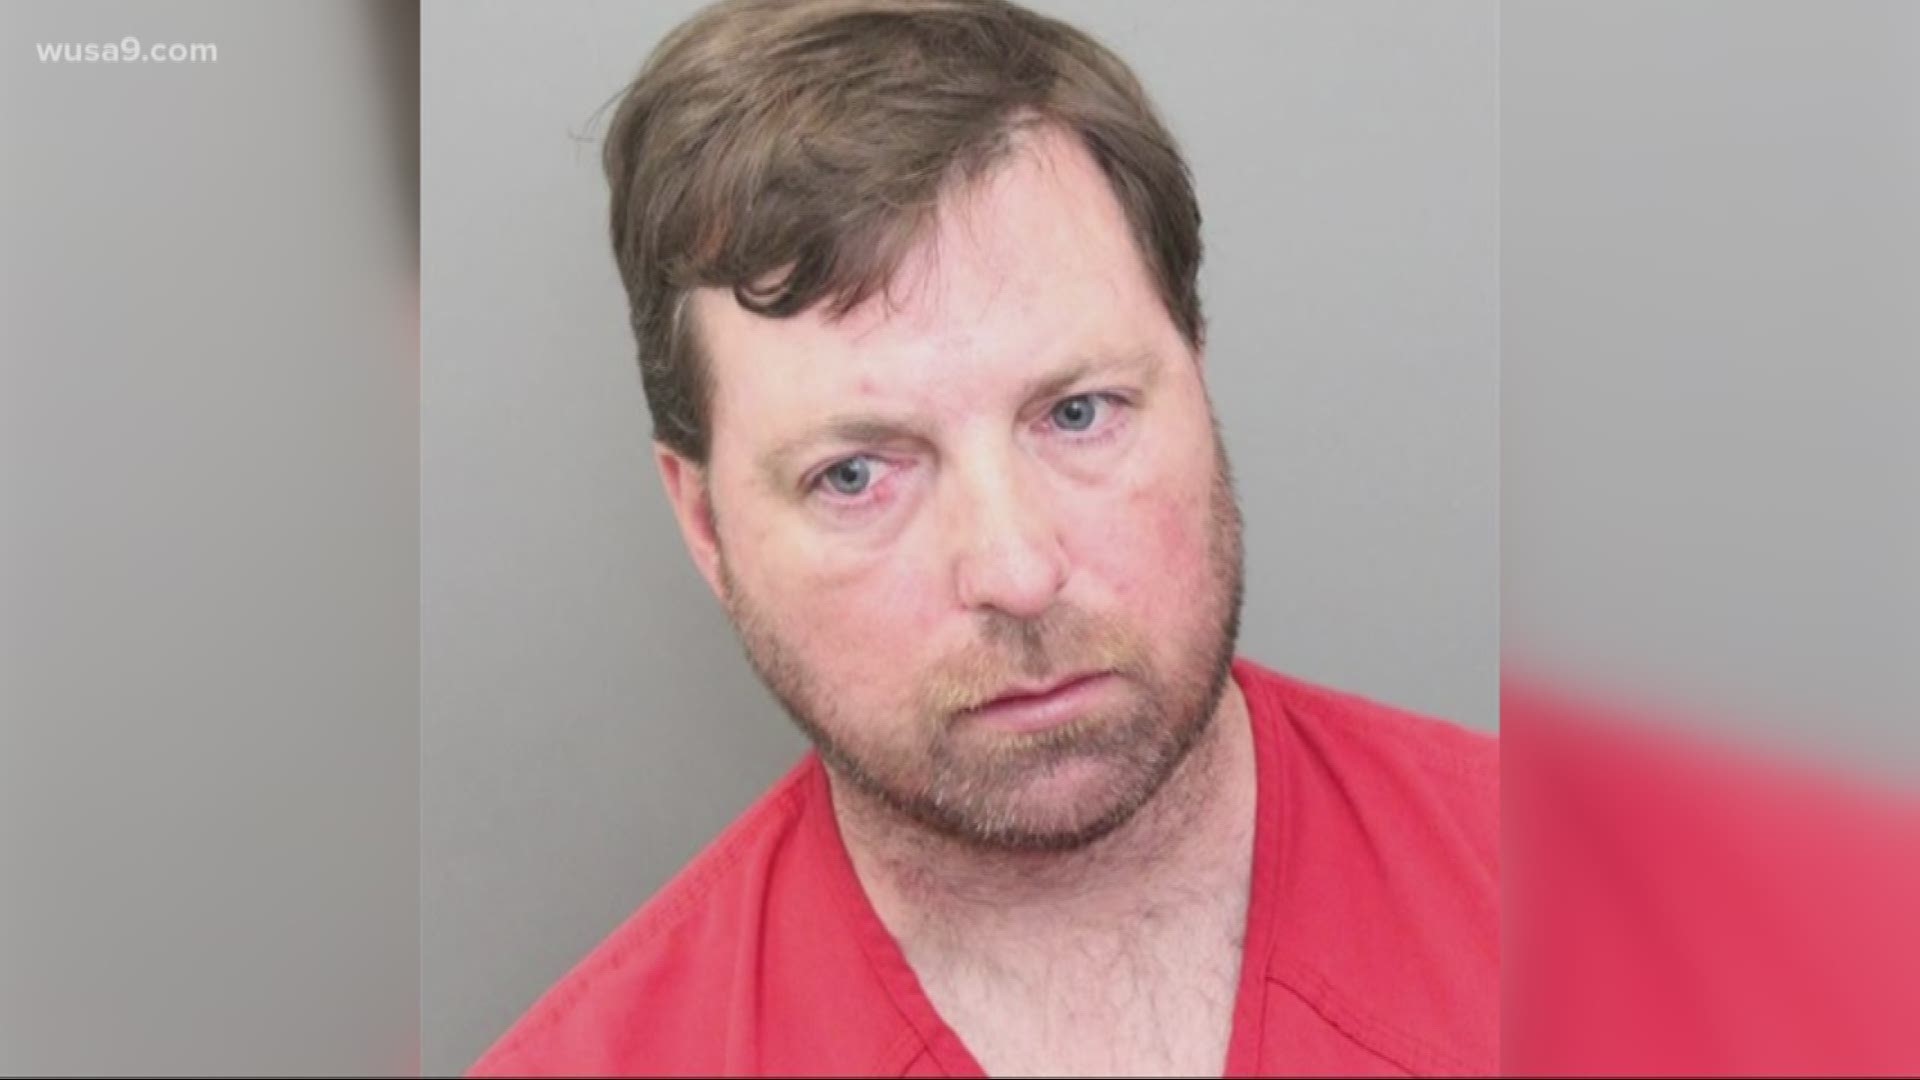 An elementary school teacher is facing charges after police said he was drinking on the job.